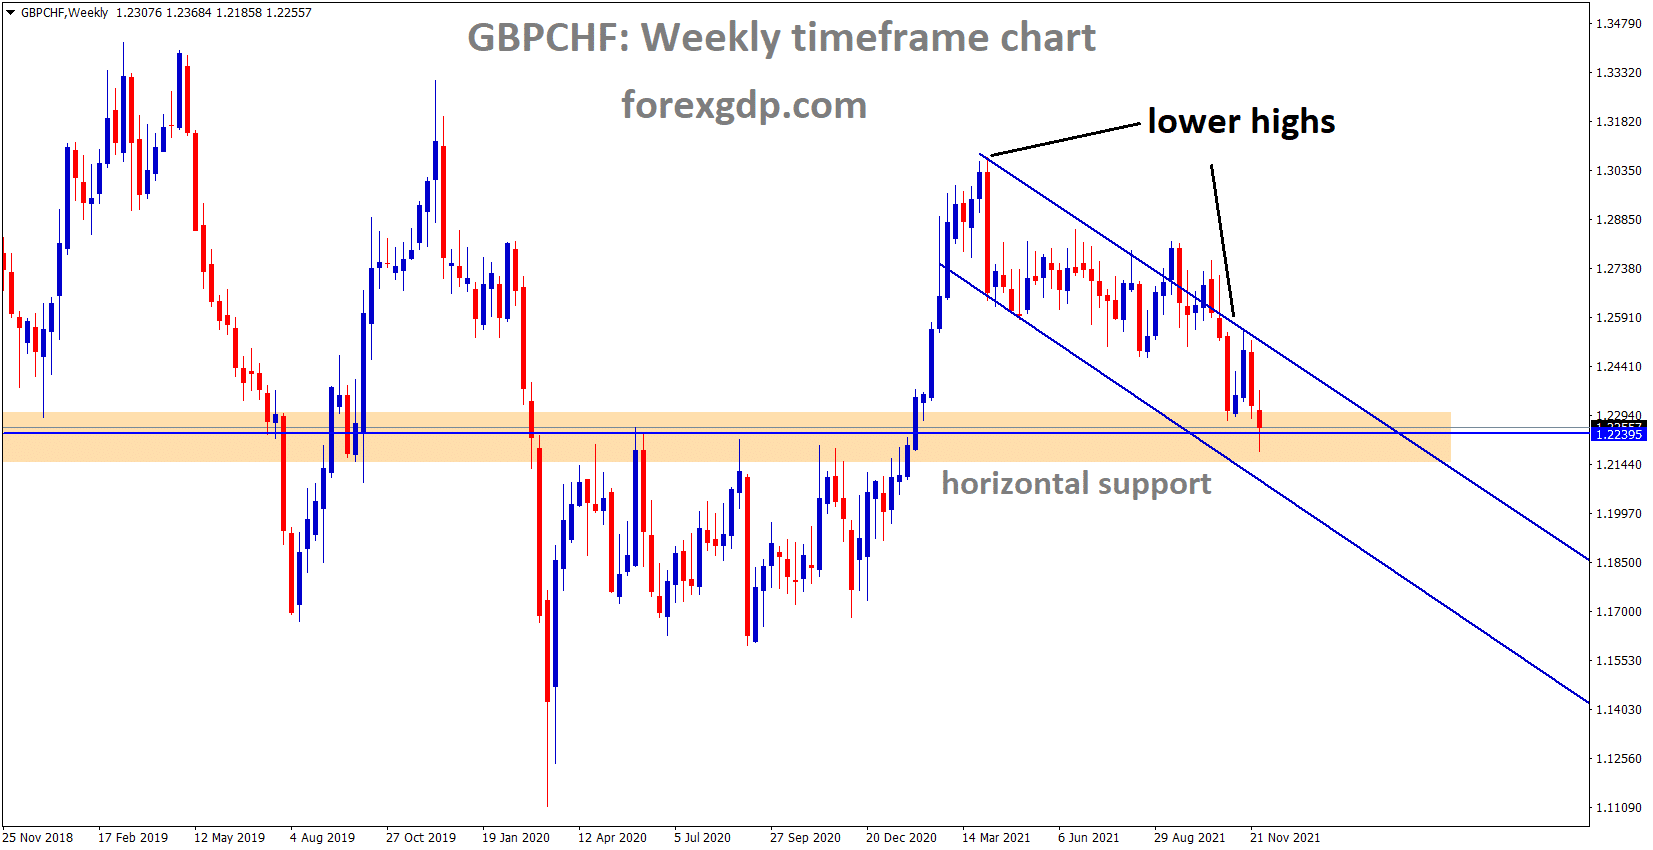 GBPCHF is moving in the Descending channel and the market reached the horizontal support area.